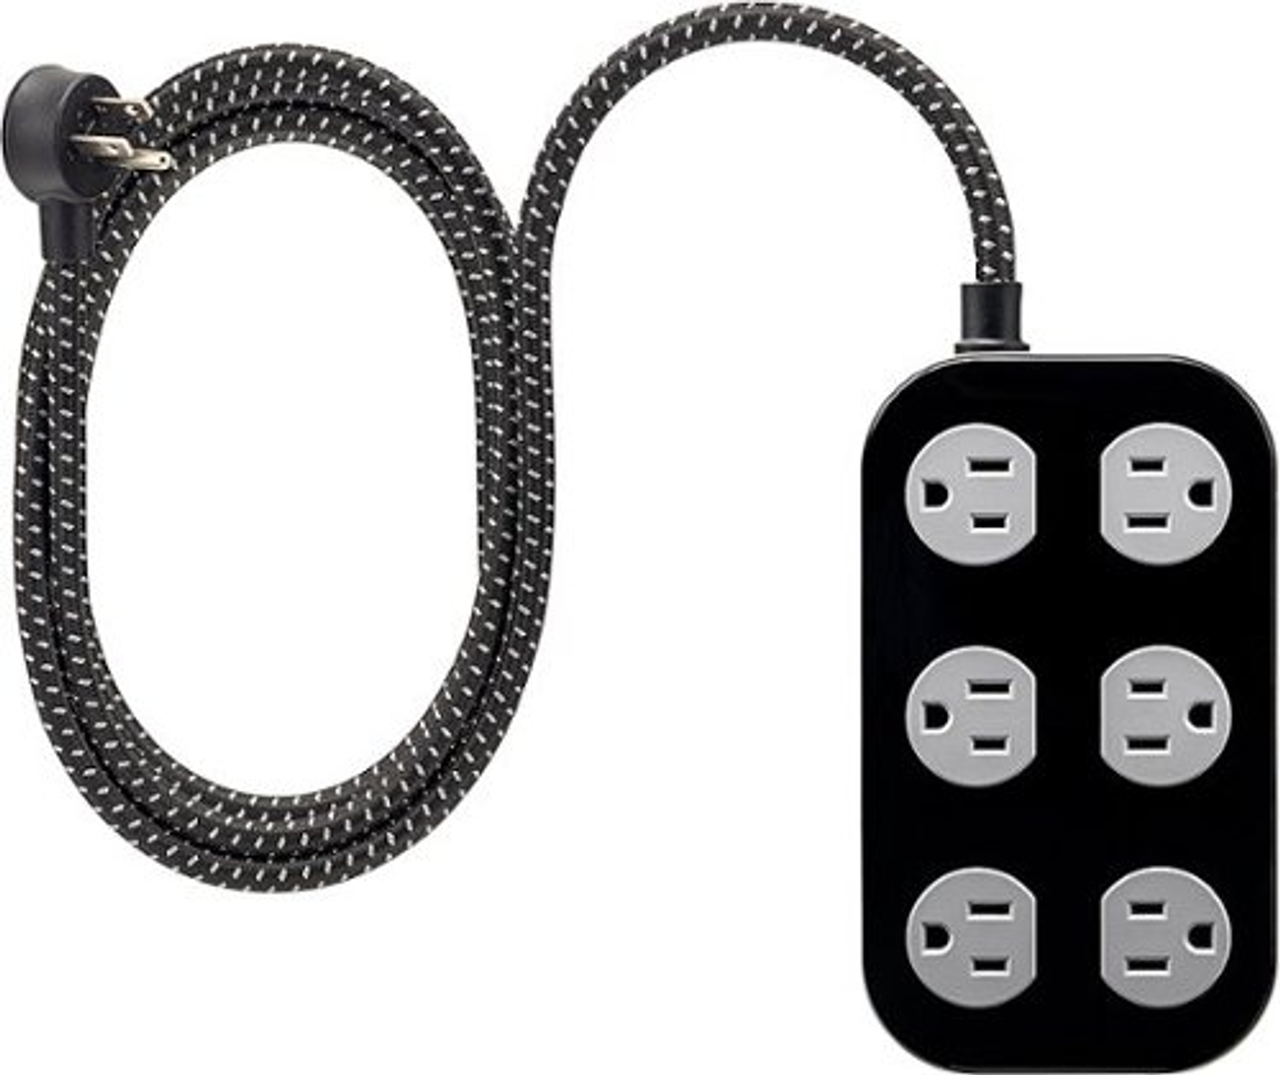 Cordinate 6-Outlet Surge Protector, 8ft Cord - Black/Gray